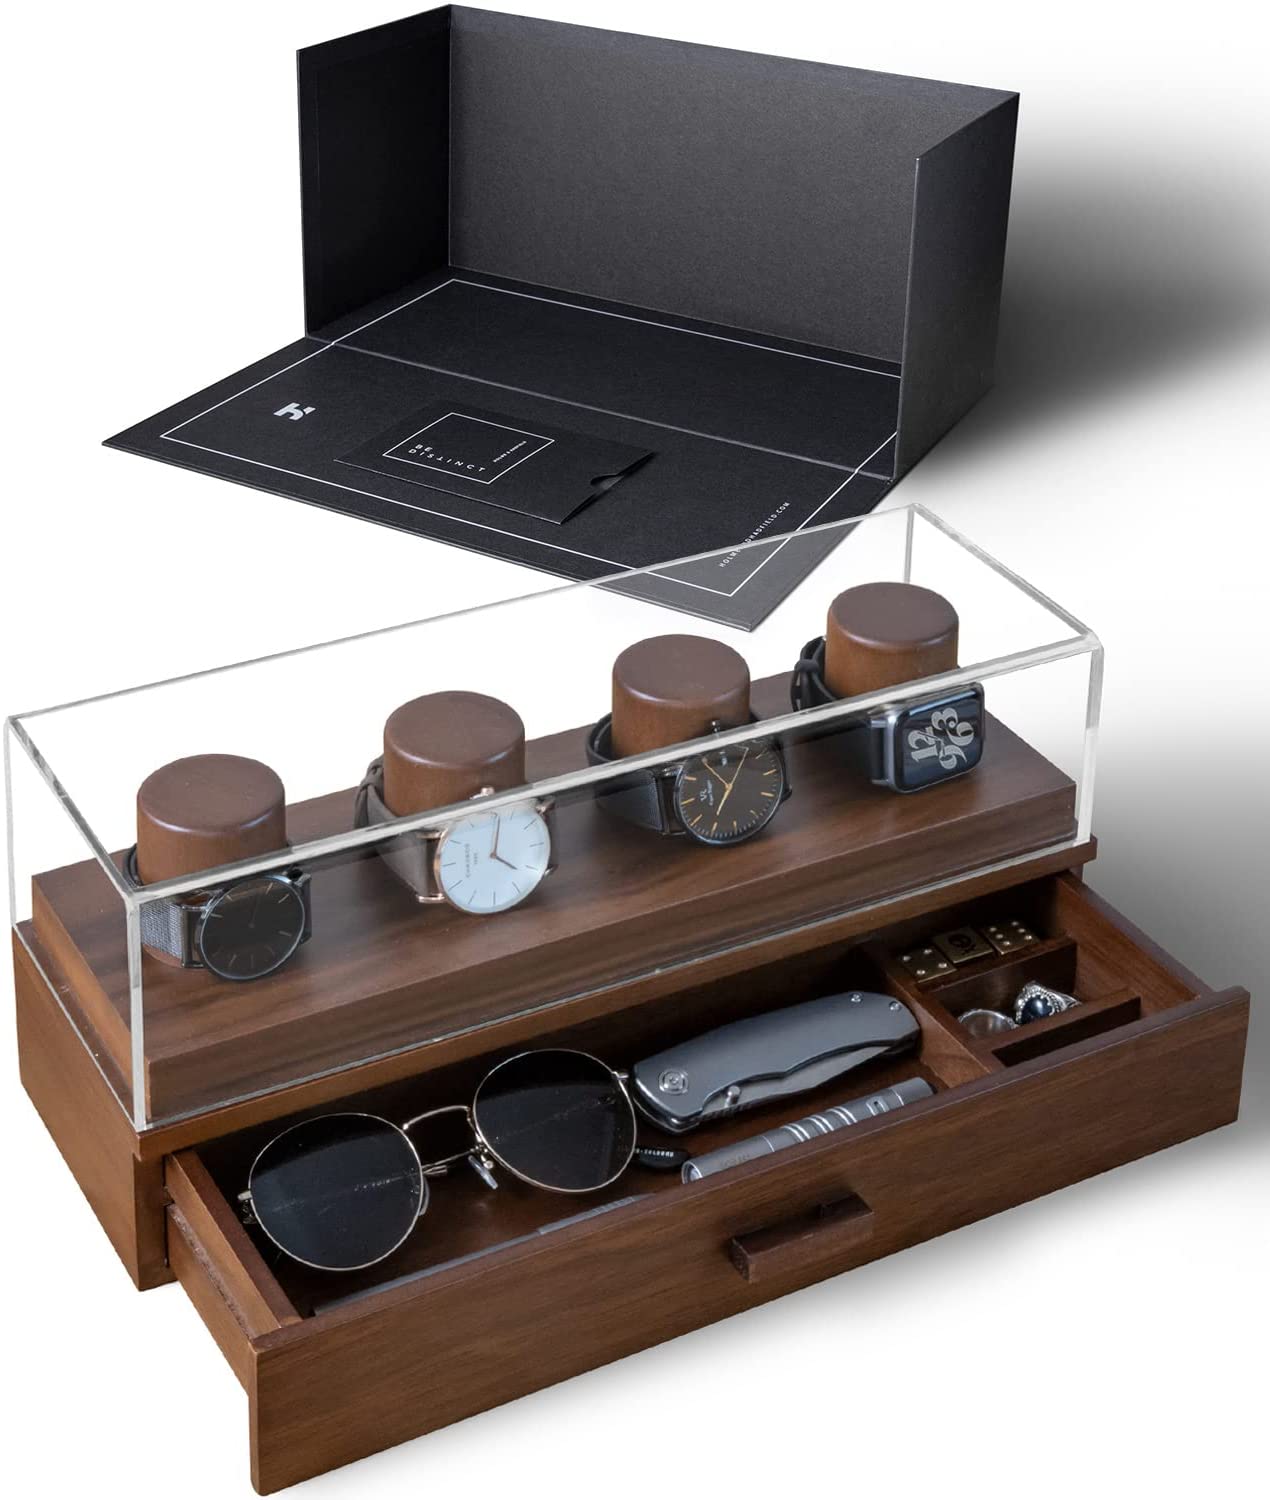 Watch Box Organizer For Fathers day gift